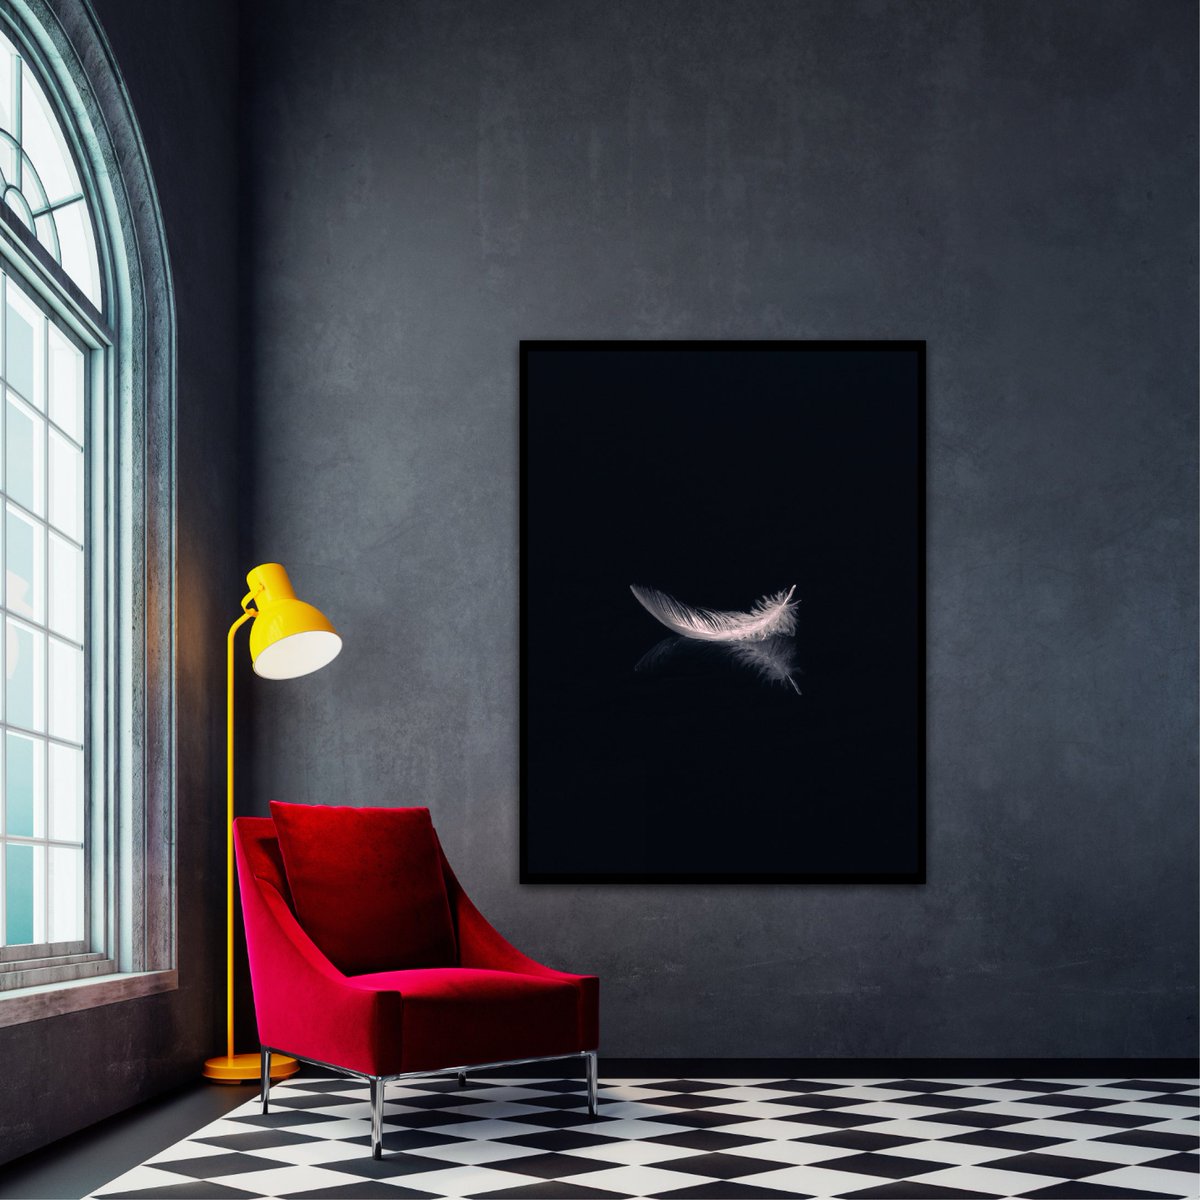 Gm 30x40 framed print of my Feathered Darkness just sold IRL close to 2 $eth in USDA🙀🥲🙏😊✌️ #fineartforsale #fineartphotography